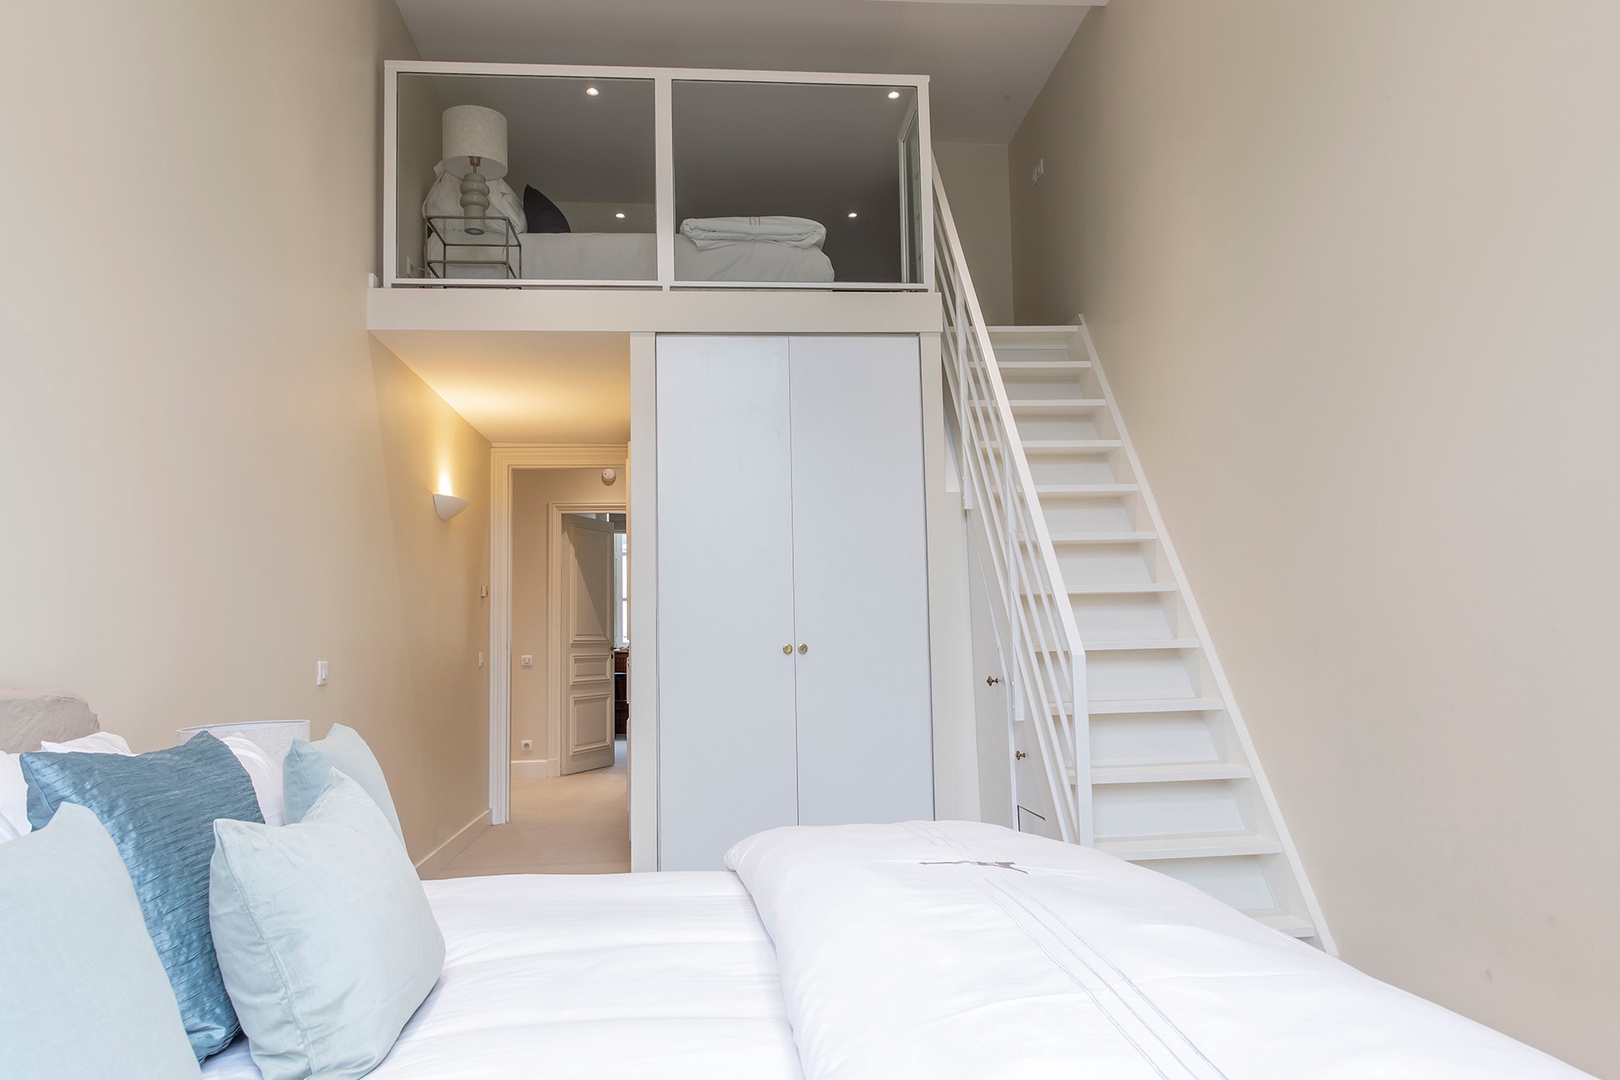 Bedroom 3 has a mezzanine level with additional sleeping options.